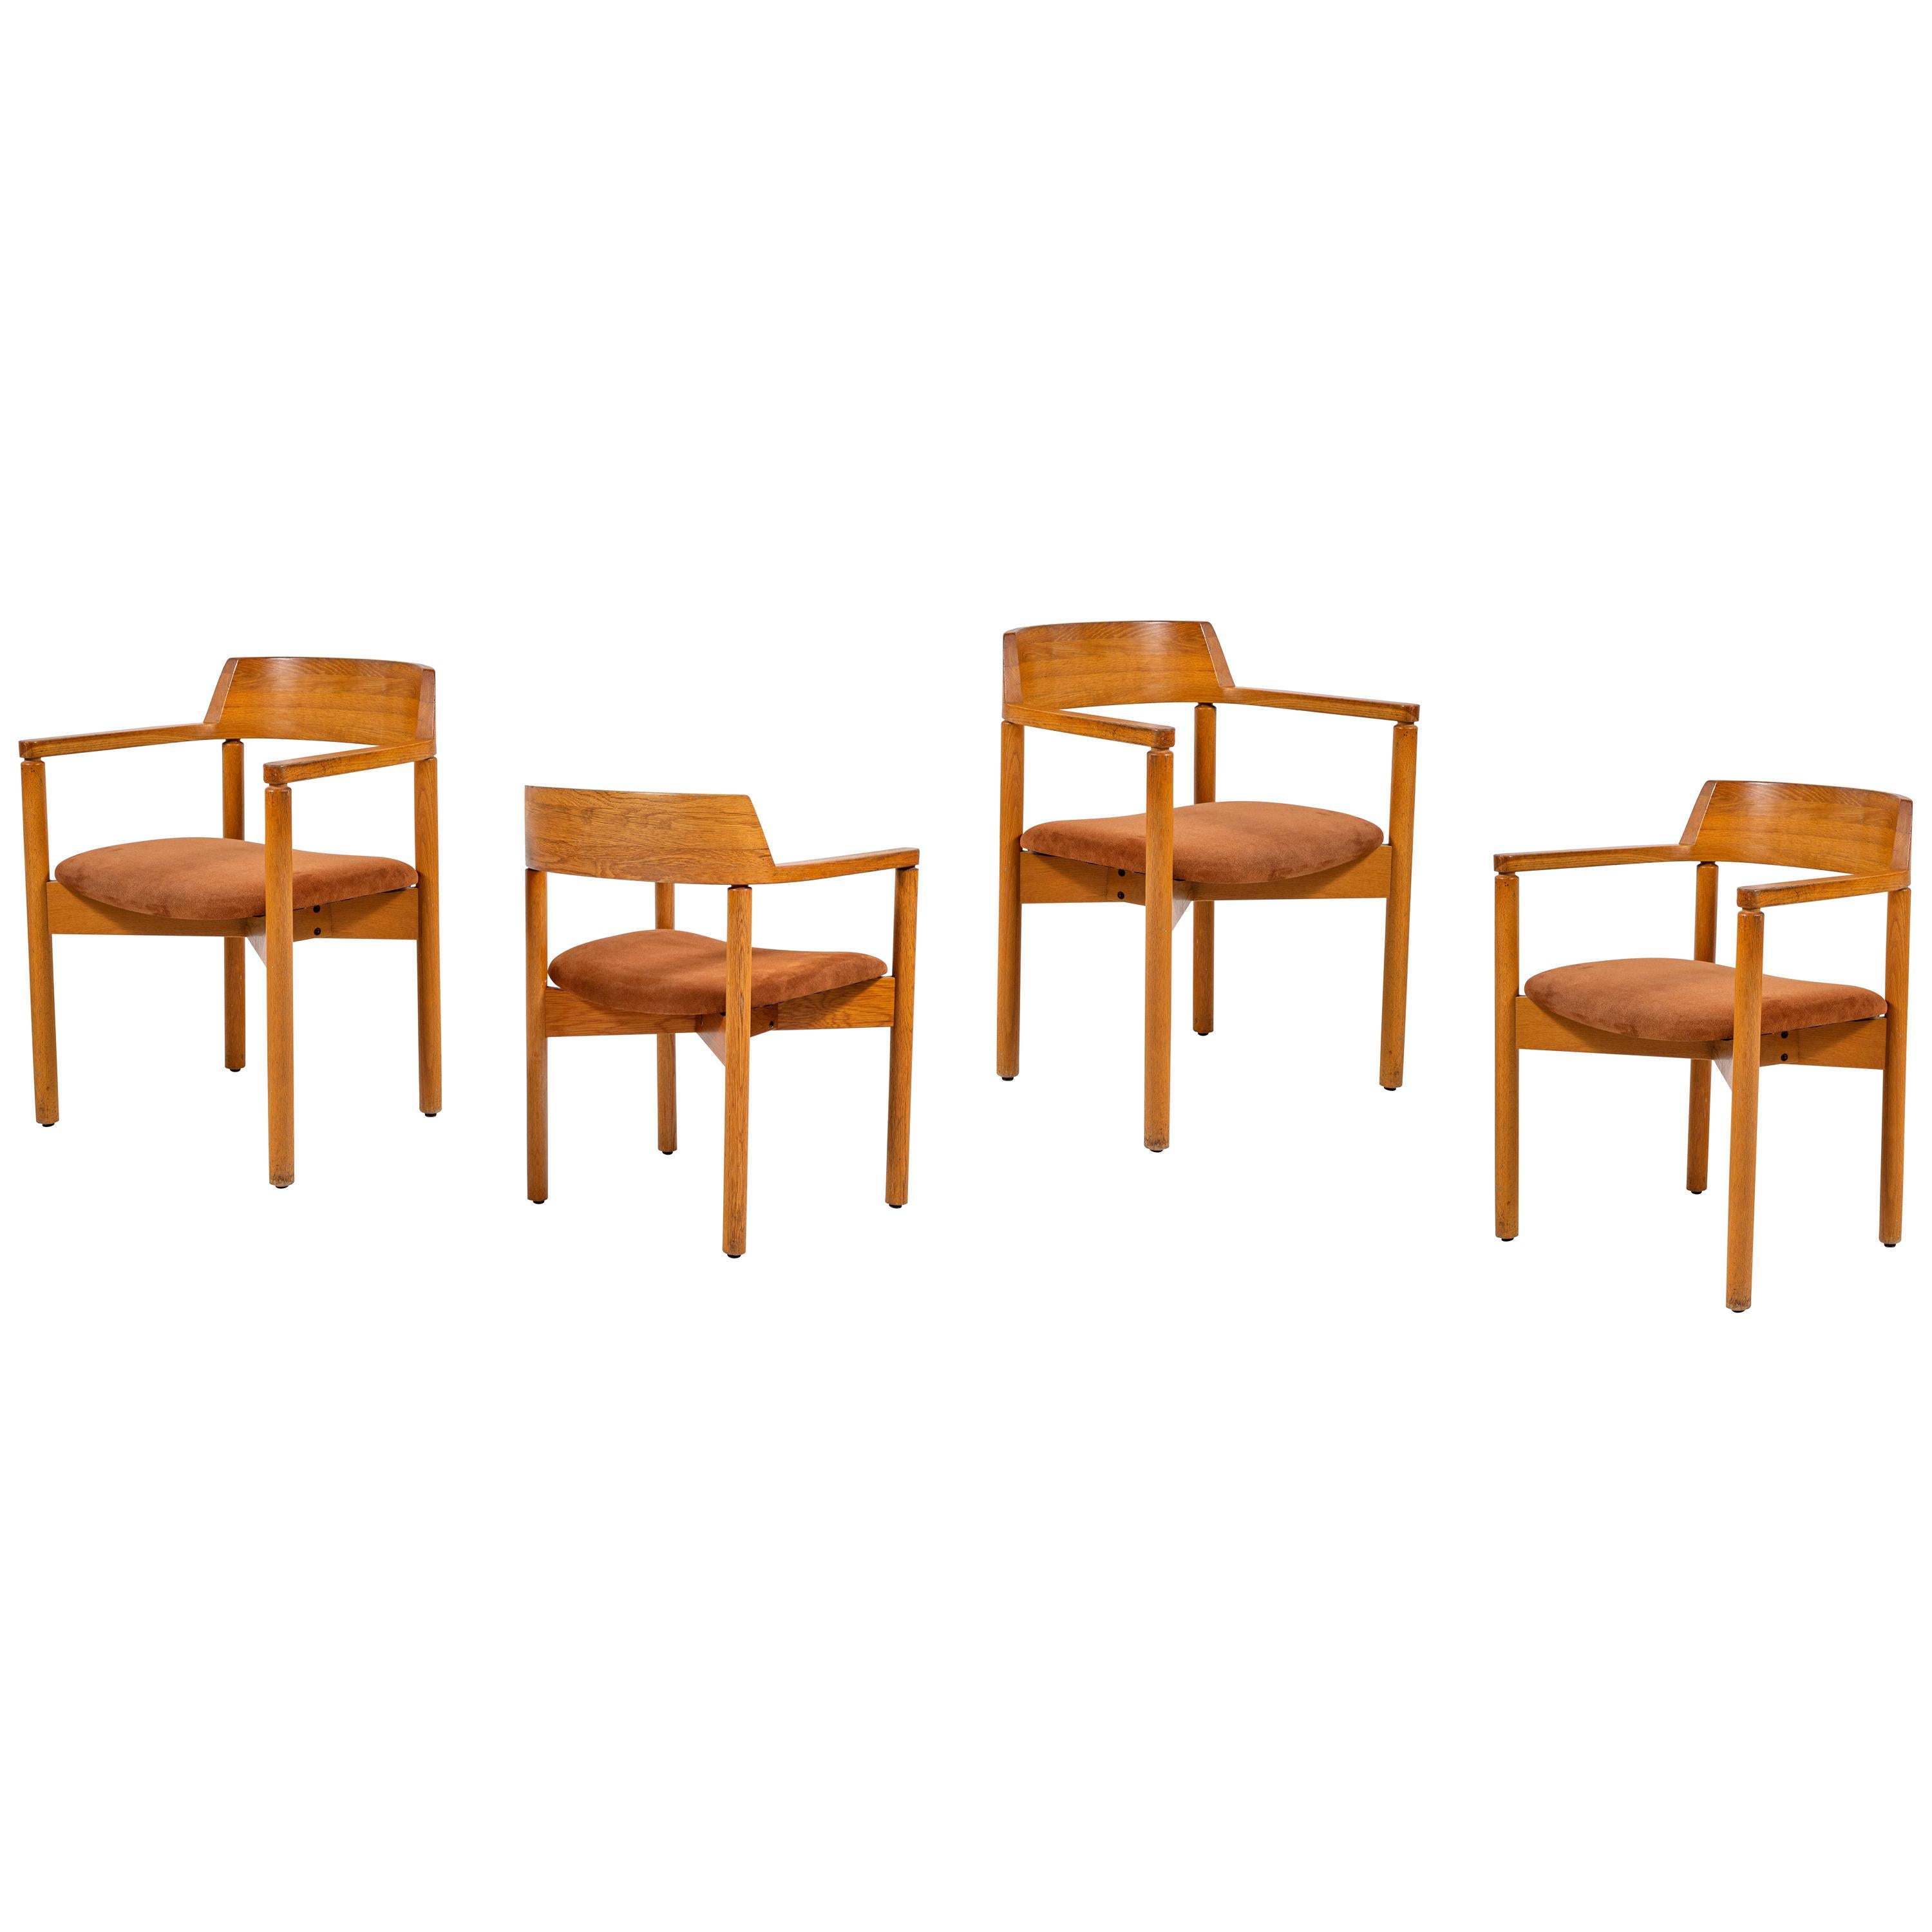 Set of Four Curved Back Dining Chairs with Suede Seats